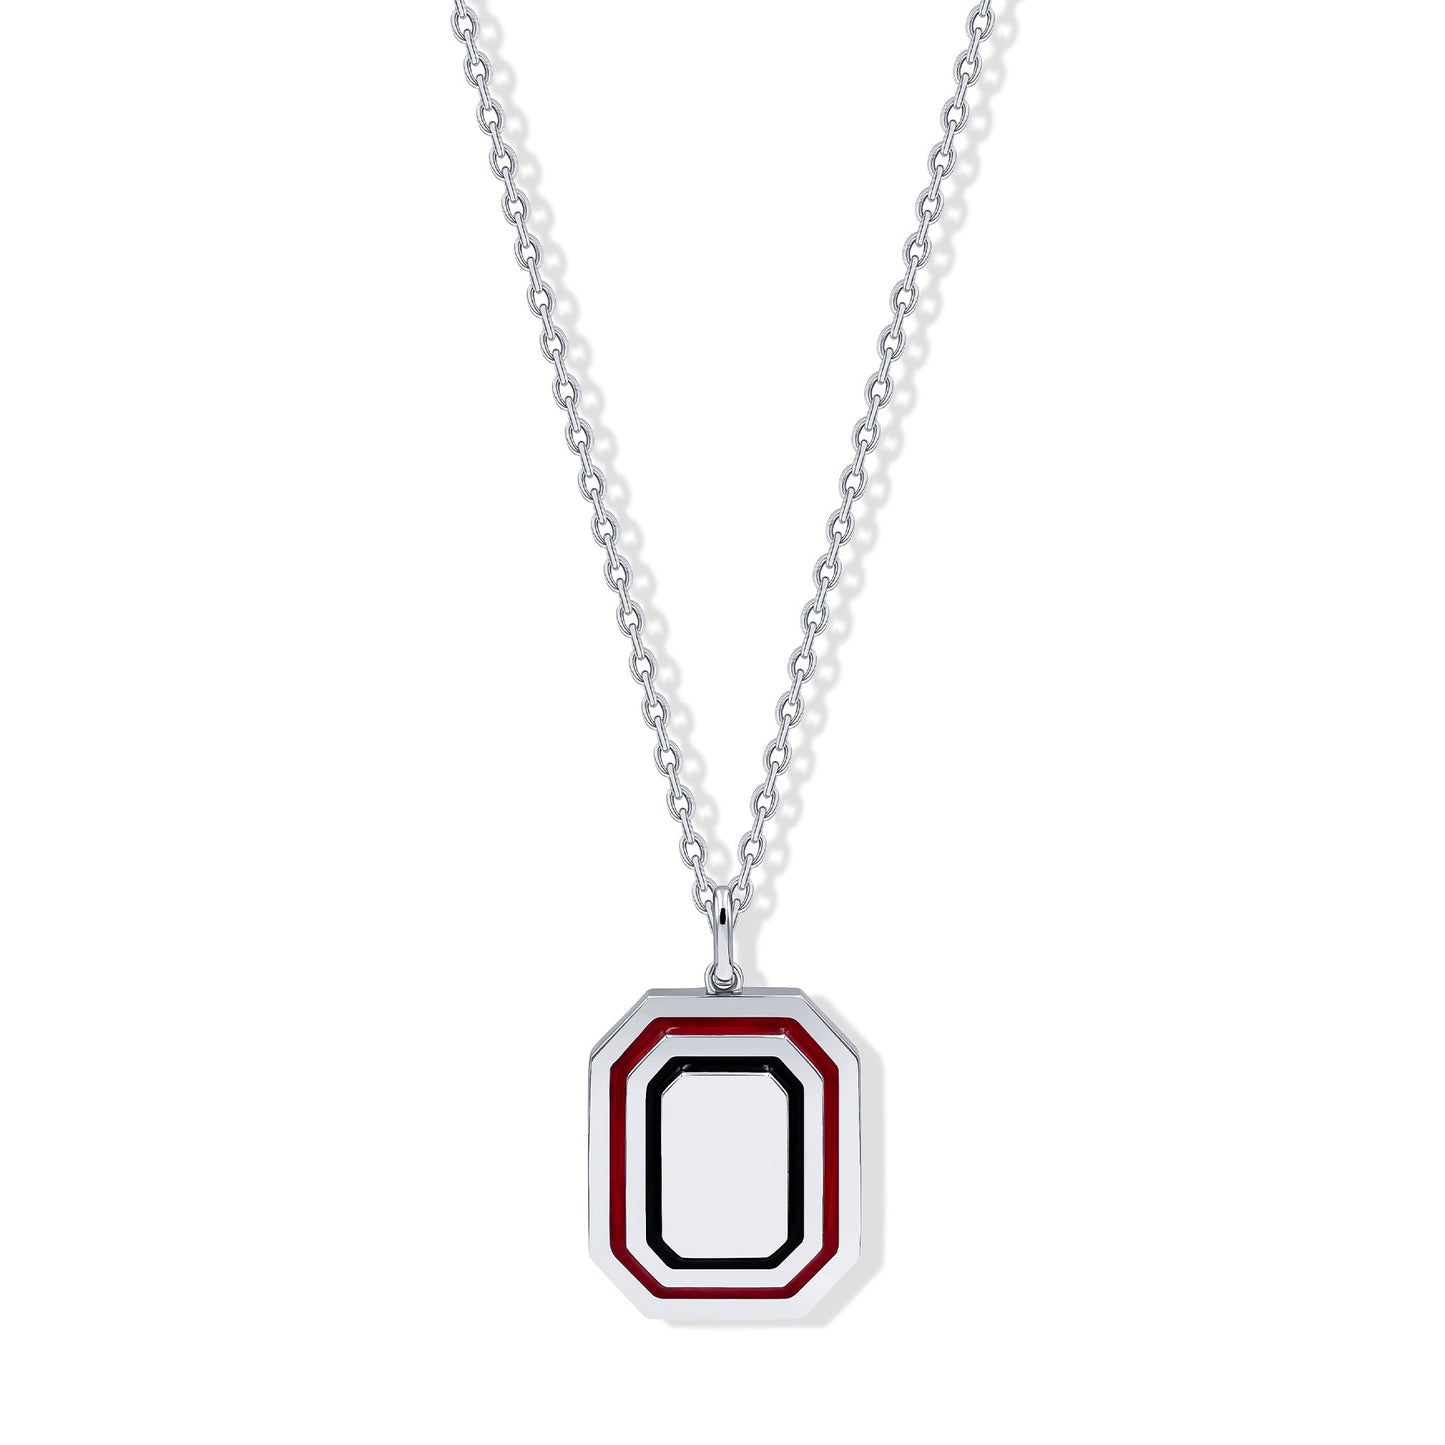 Ted Necklace, Red and Black Enamel - Platinum - for Him - 18k Gold - Lynor